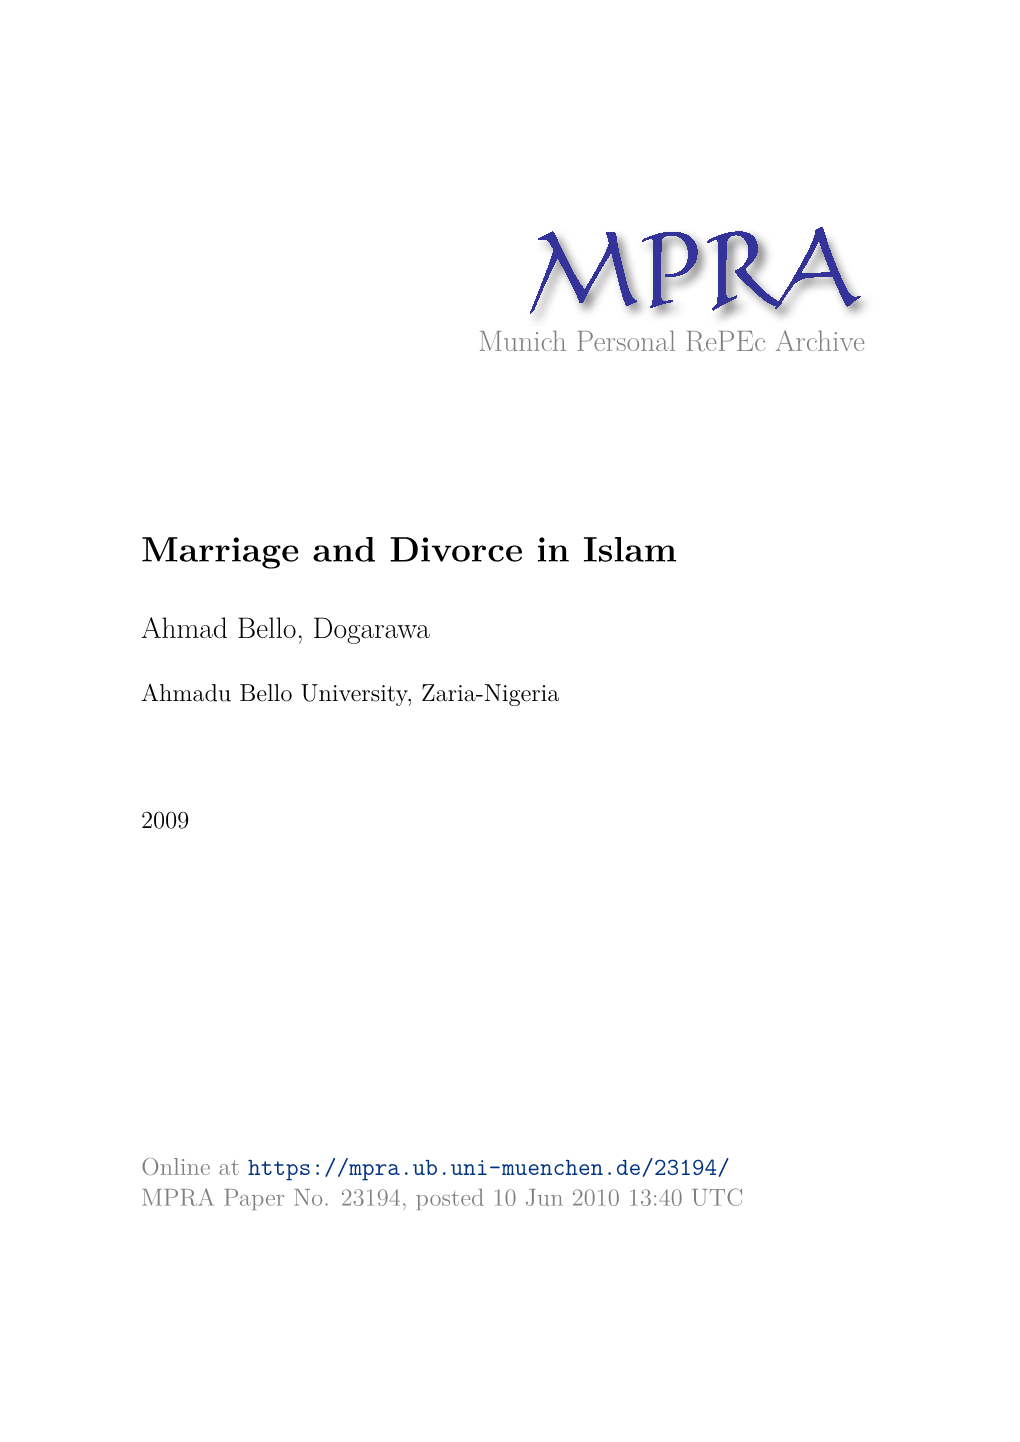 The Concept of Marriage Marriage, As Prescribed by Allah, Is the Lawful Union of a Man and Woman Based on Mutual Consent